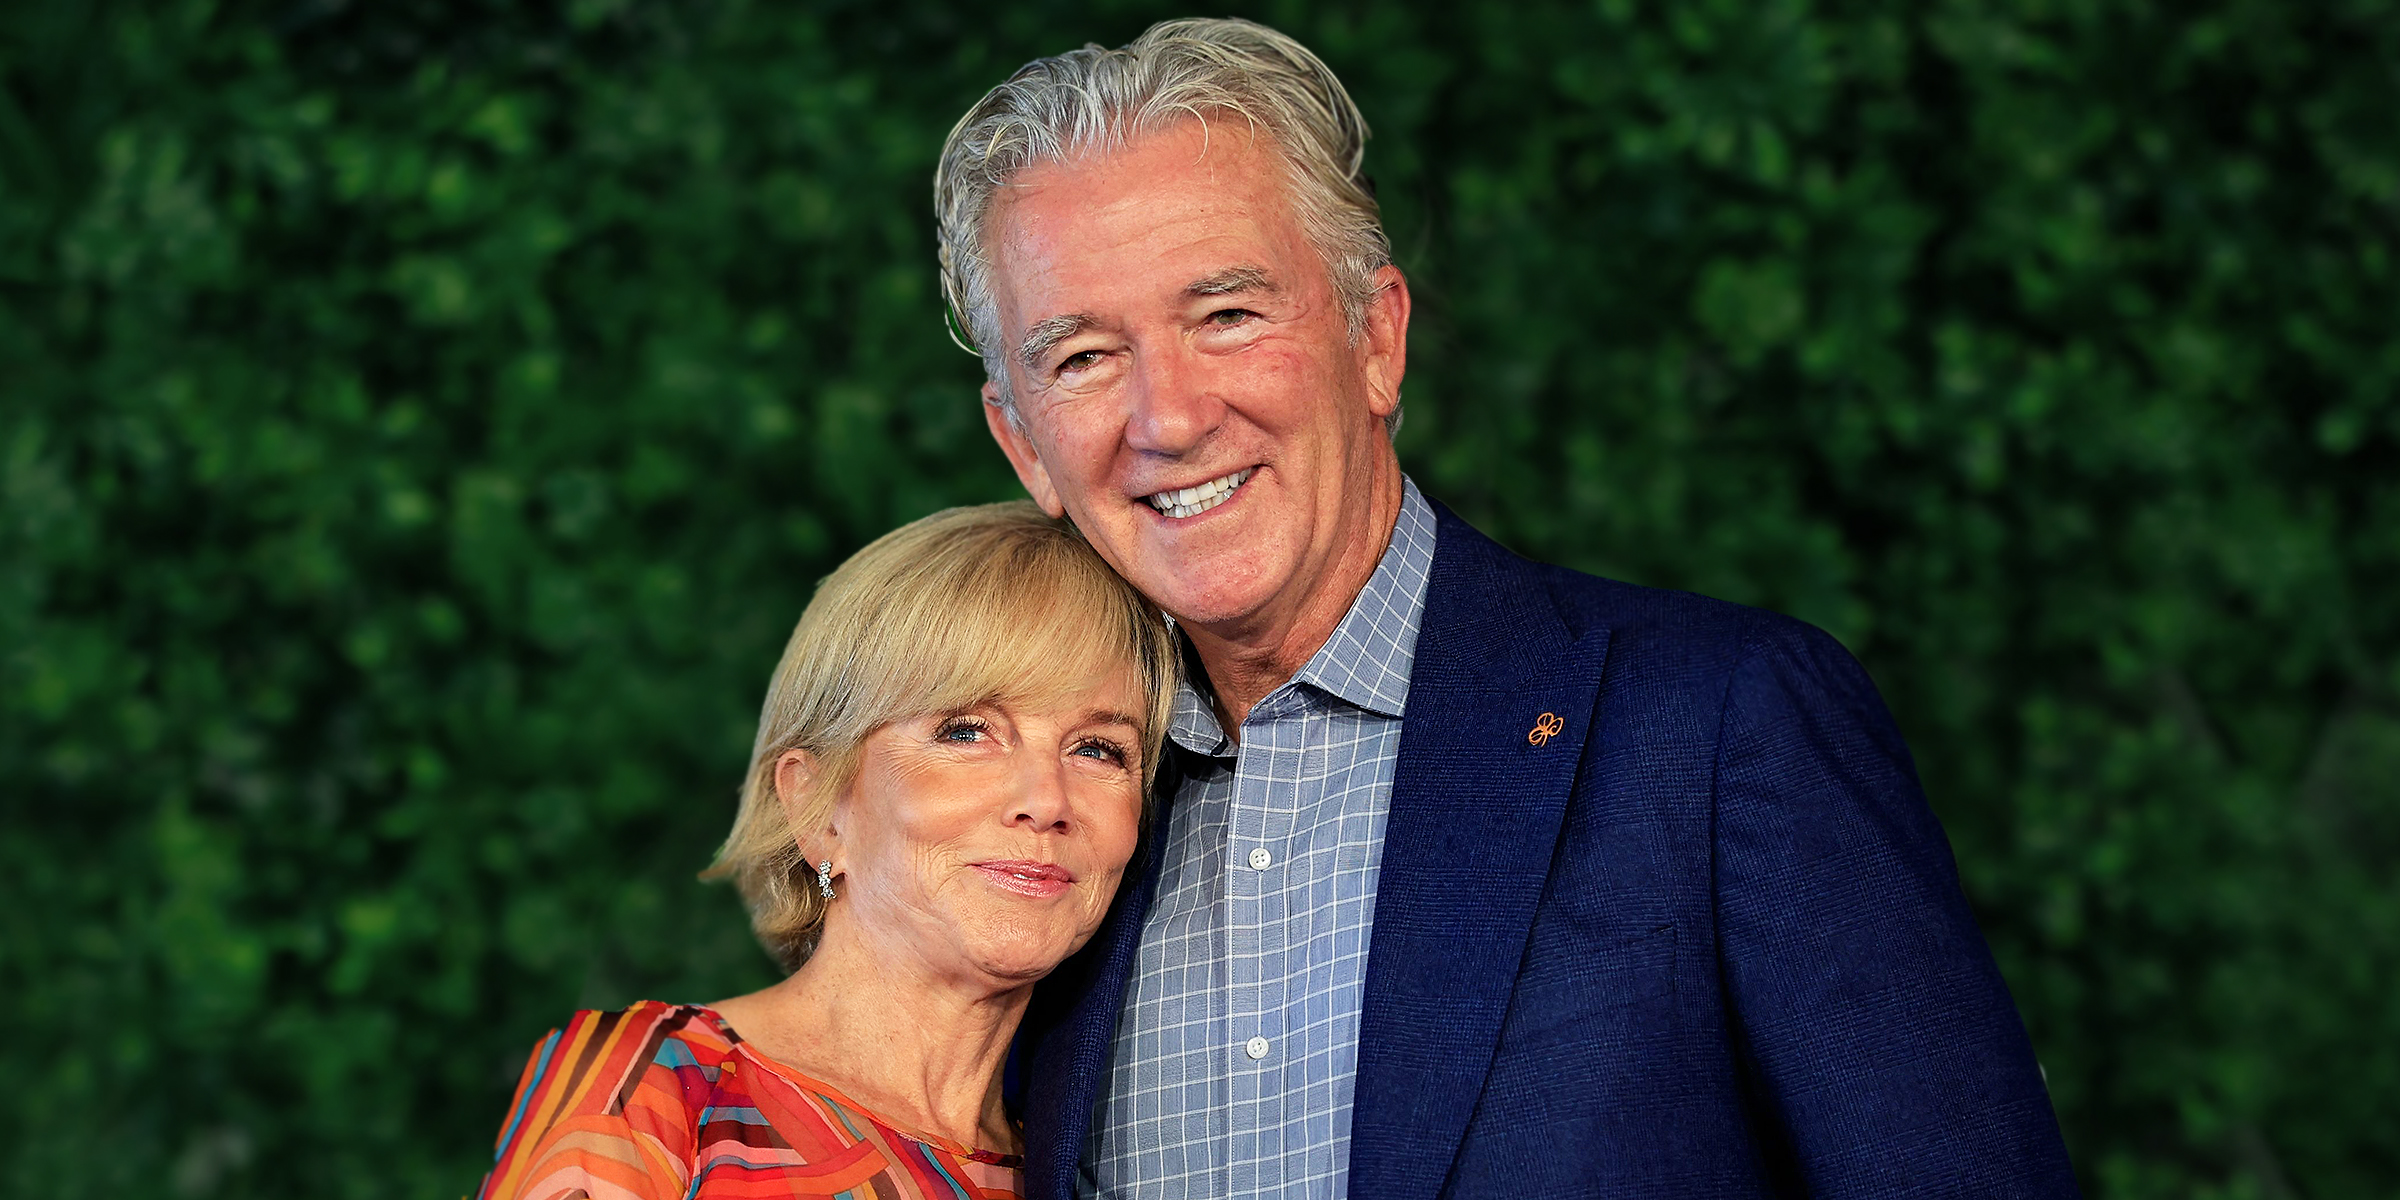 Linda Purl and Patrick Duffy | Source: Getty Images